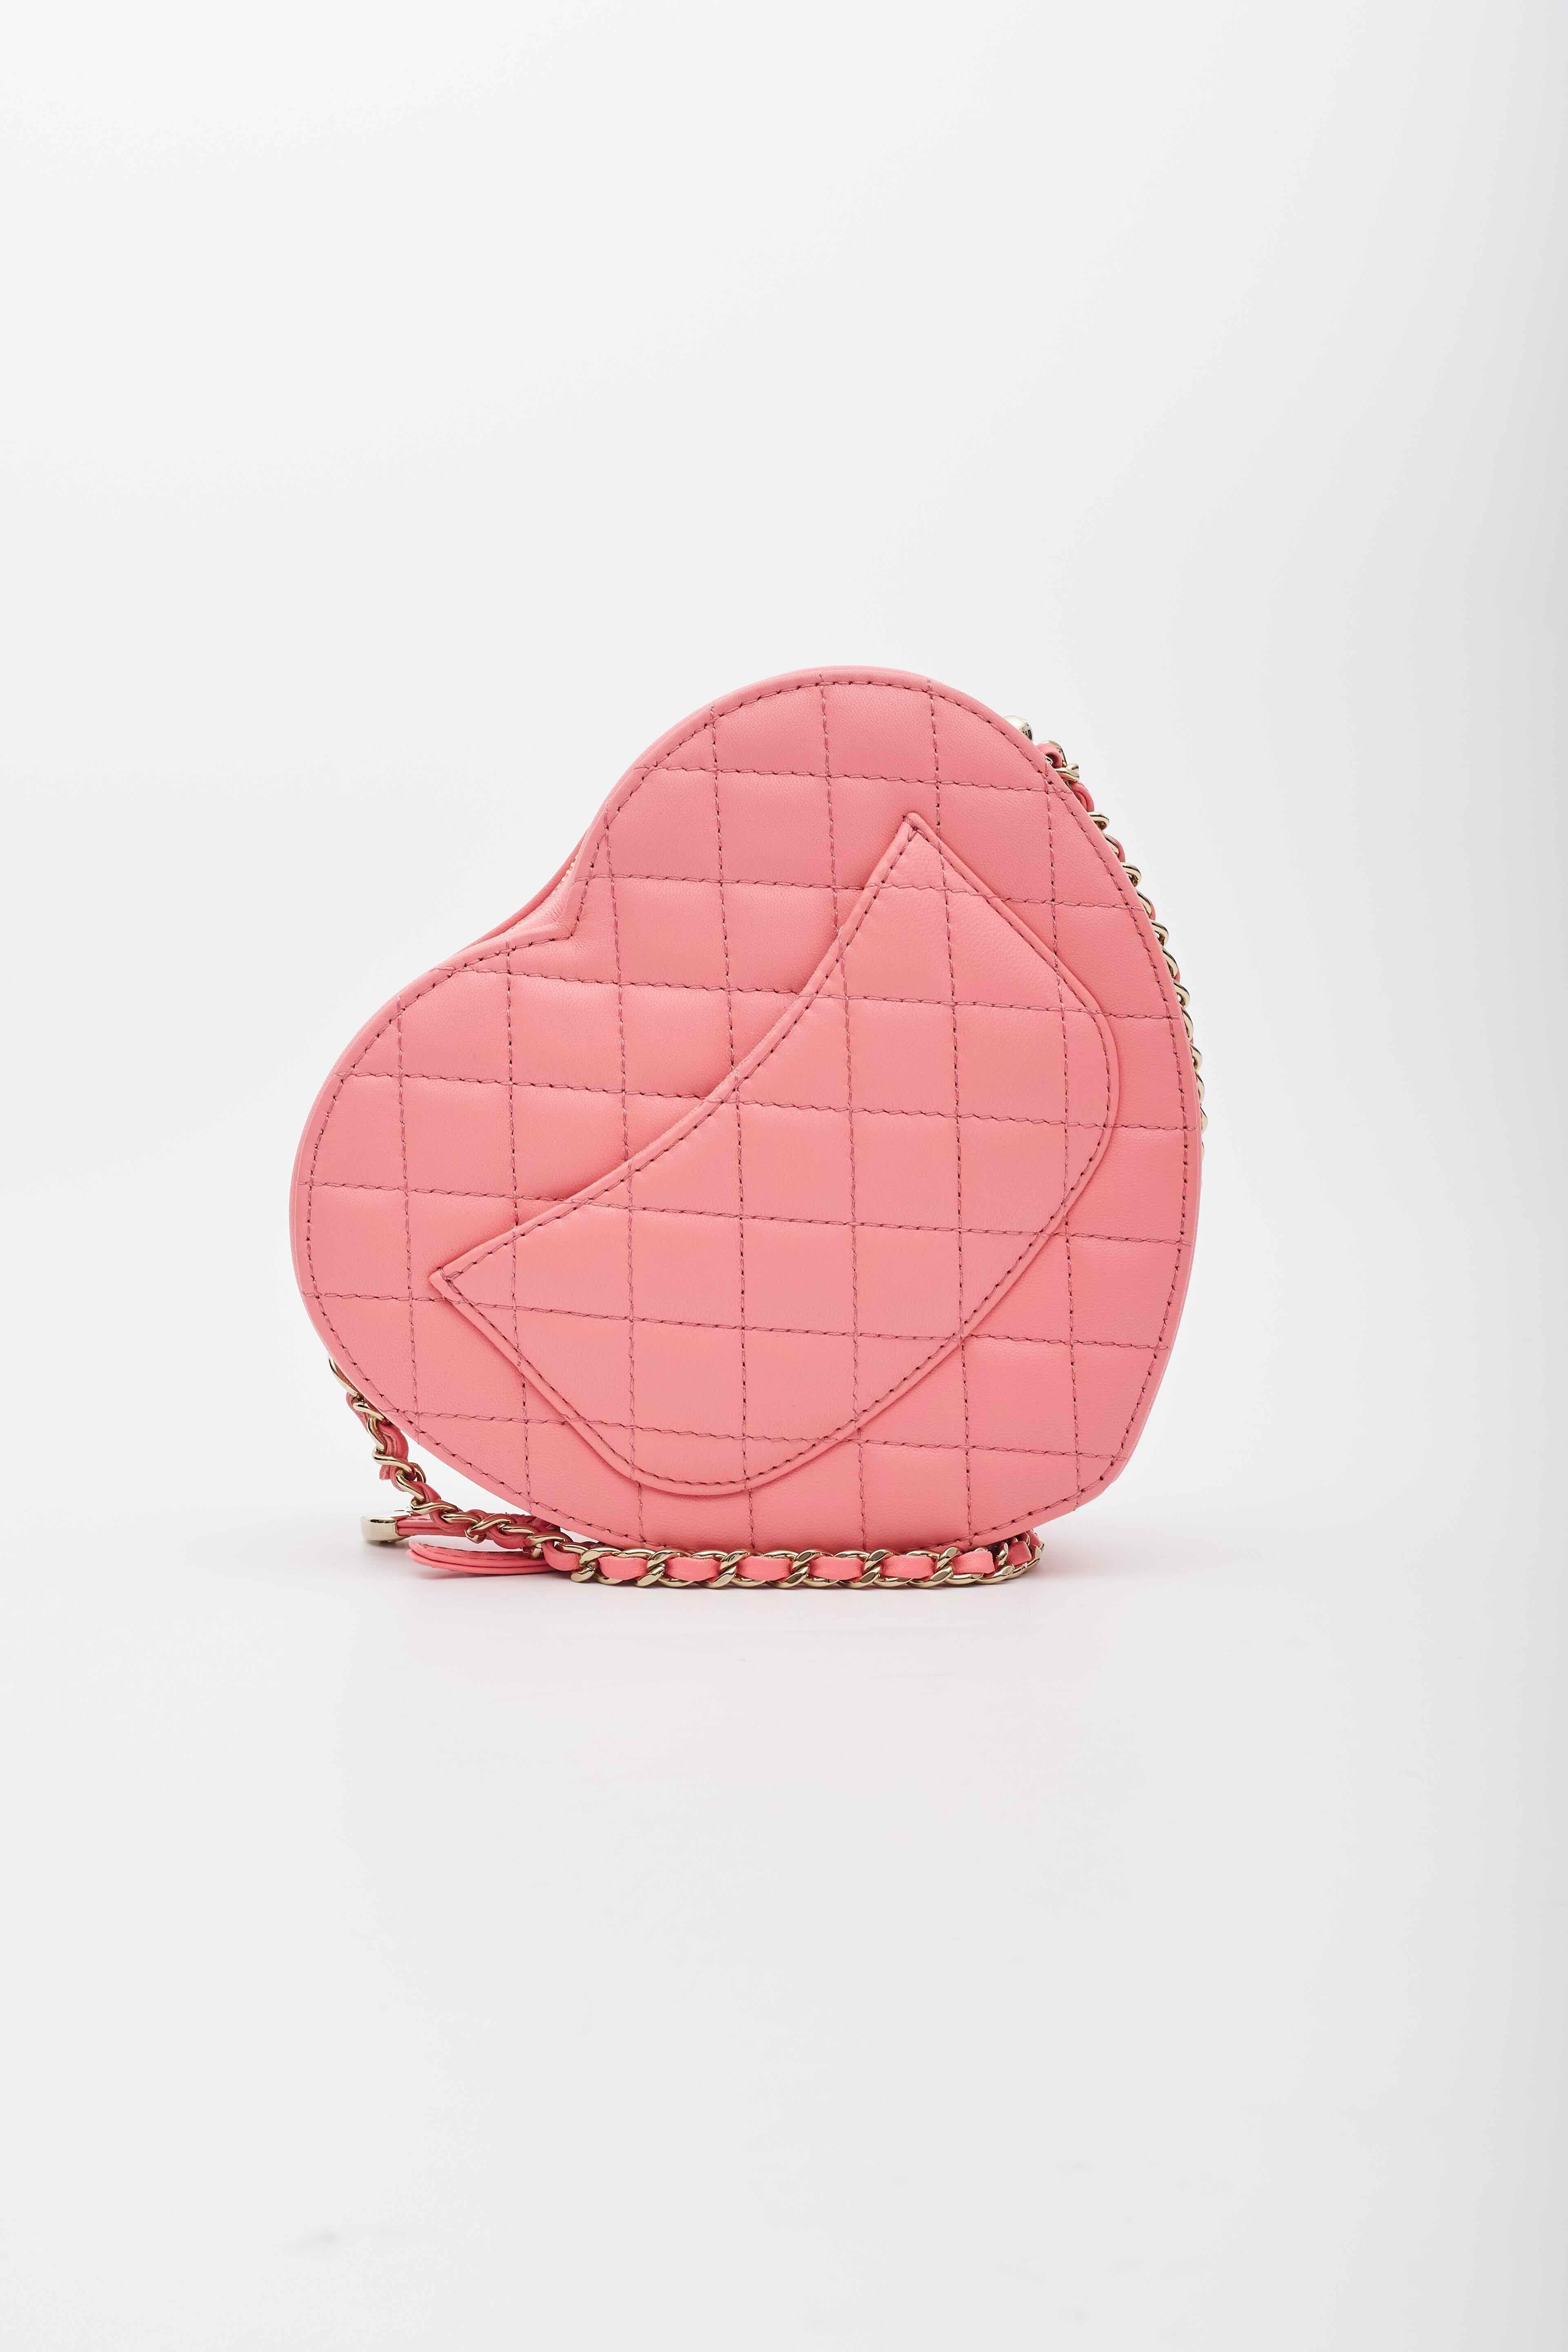 This Chanel bag is made of diamond-quilted lambskin leather in the shape of a heart. The bag features a leather-threaded light gold chain shoulder strap and a matching gold CC turn-lock on the front flap pocket. The top zipper opens to a pink fabric